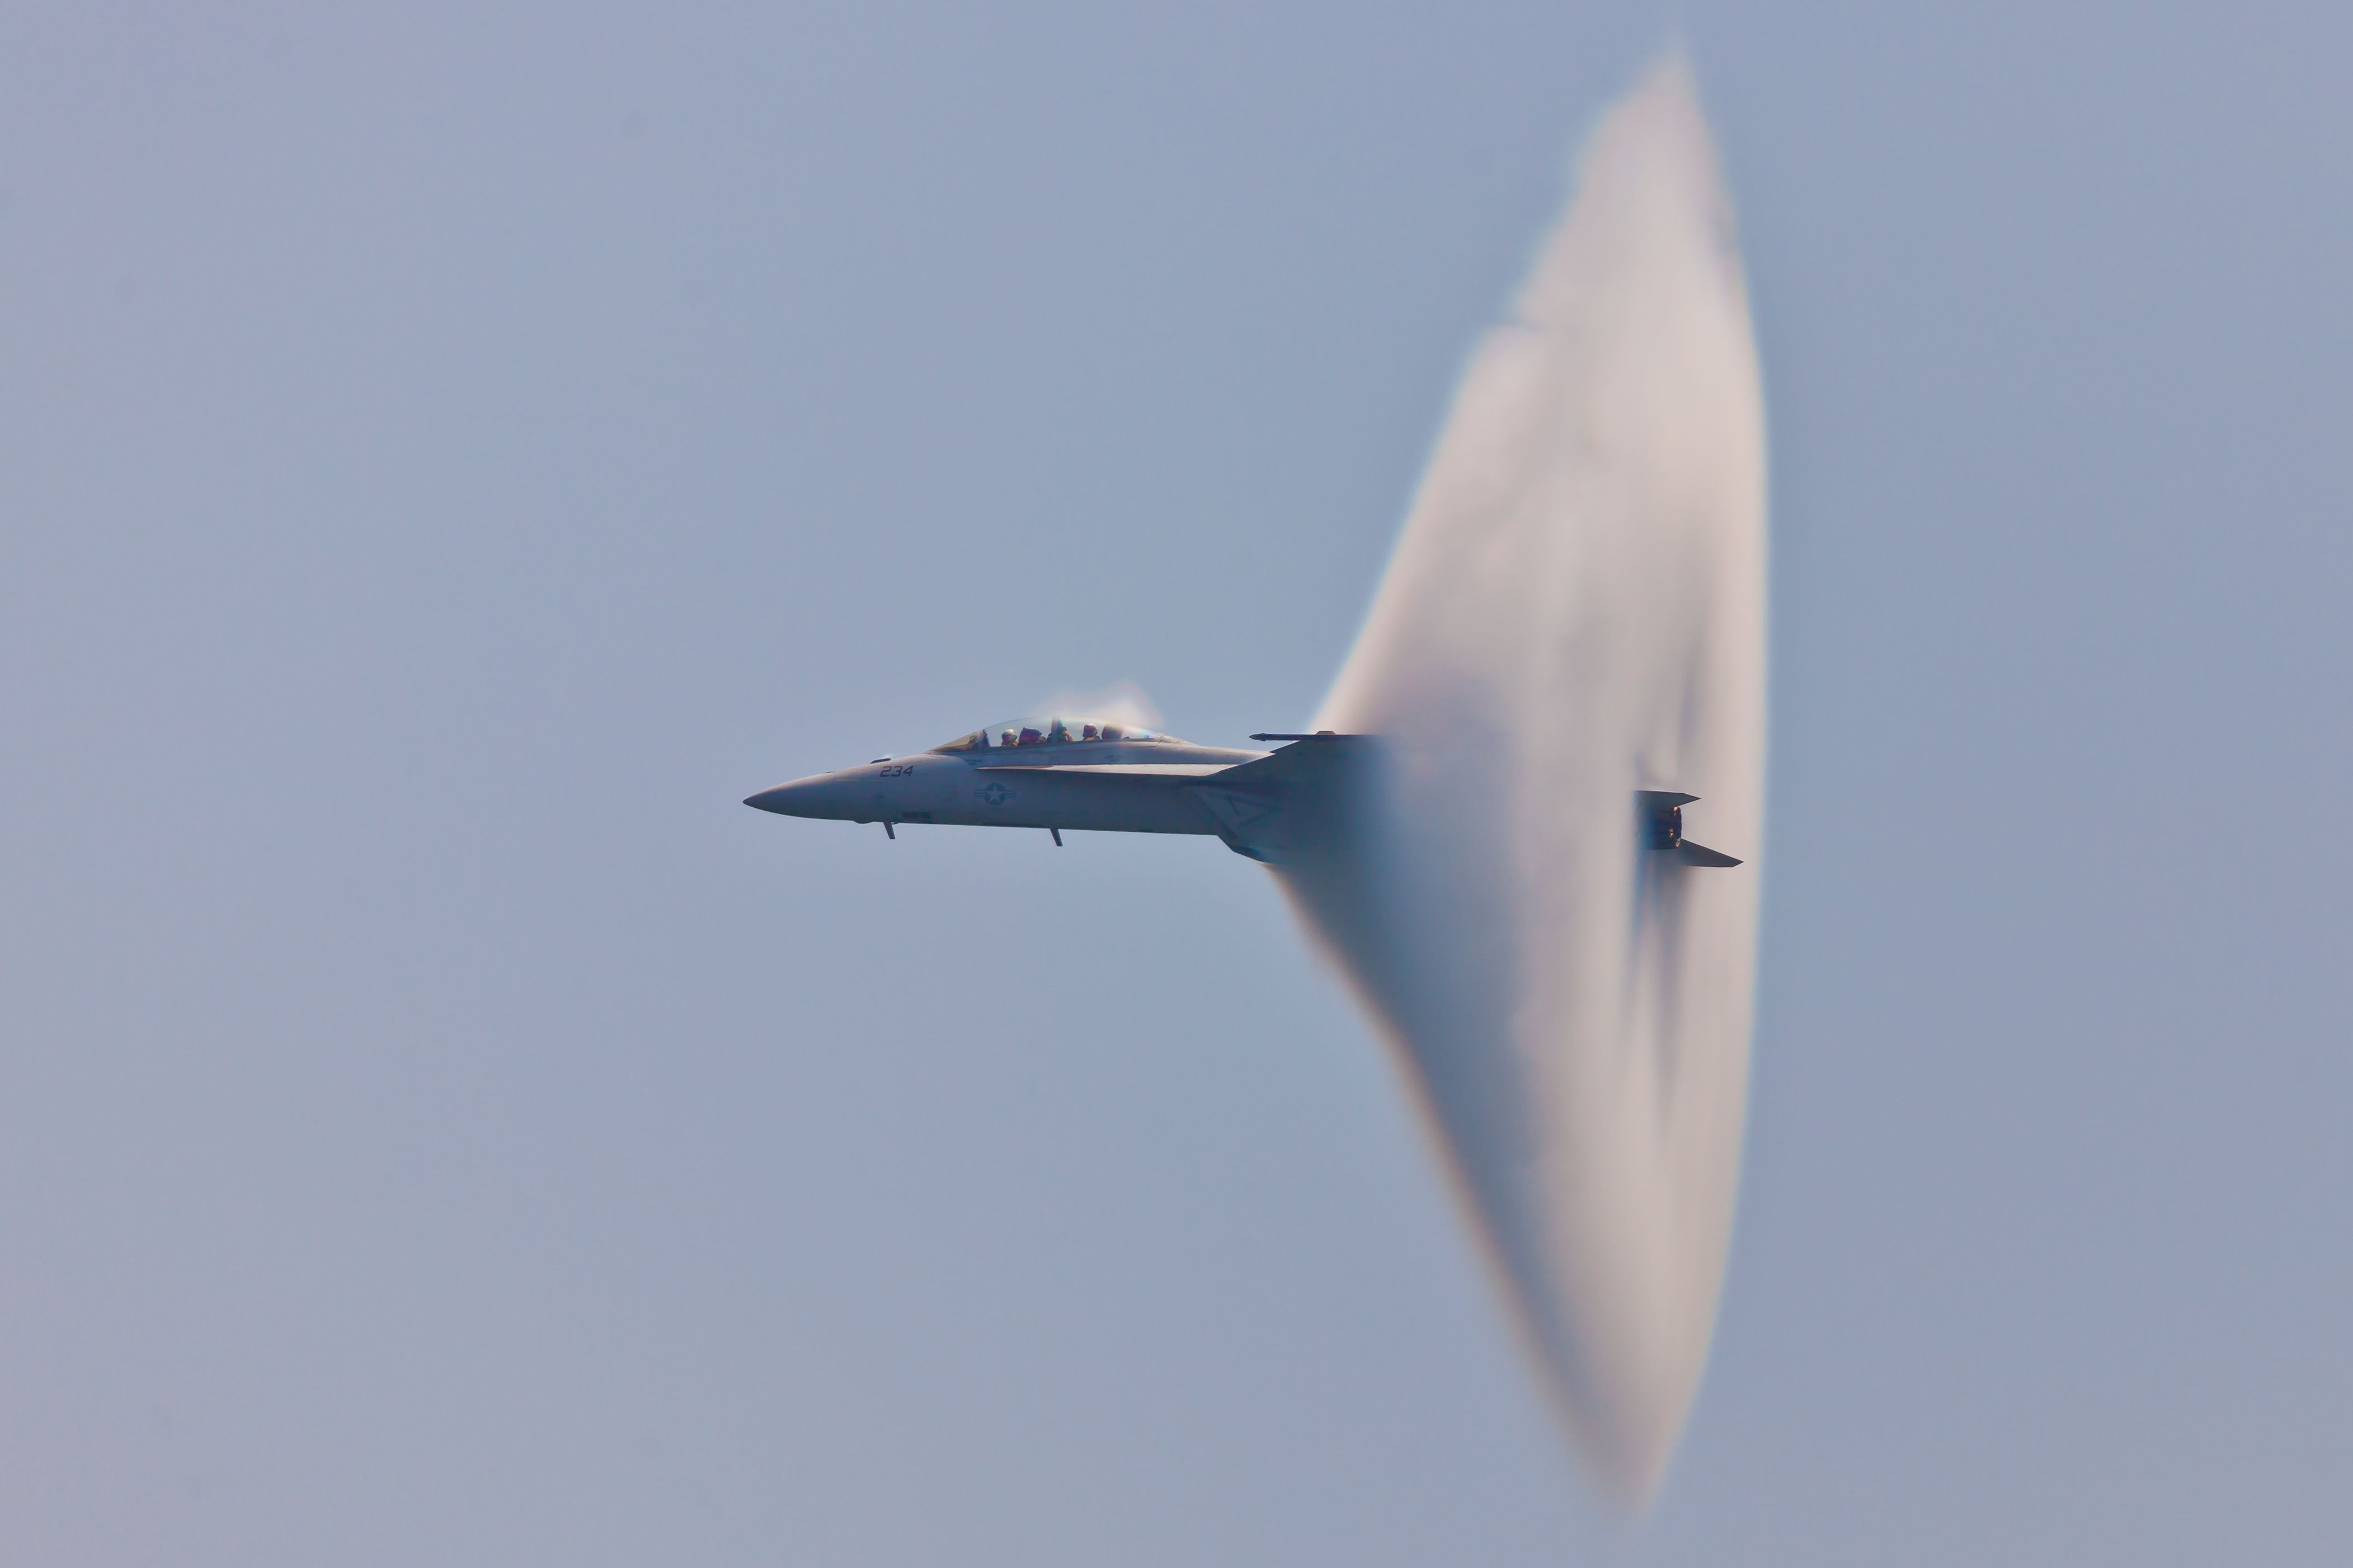 An F-18 Super Hornet with a Mach Cone at the tail.